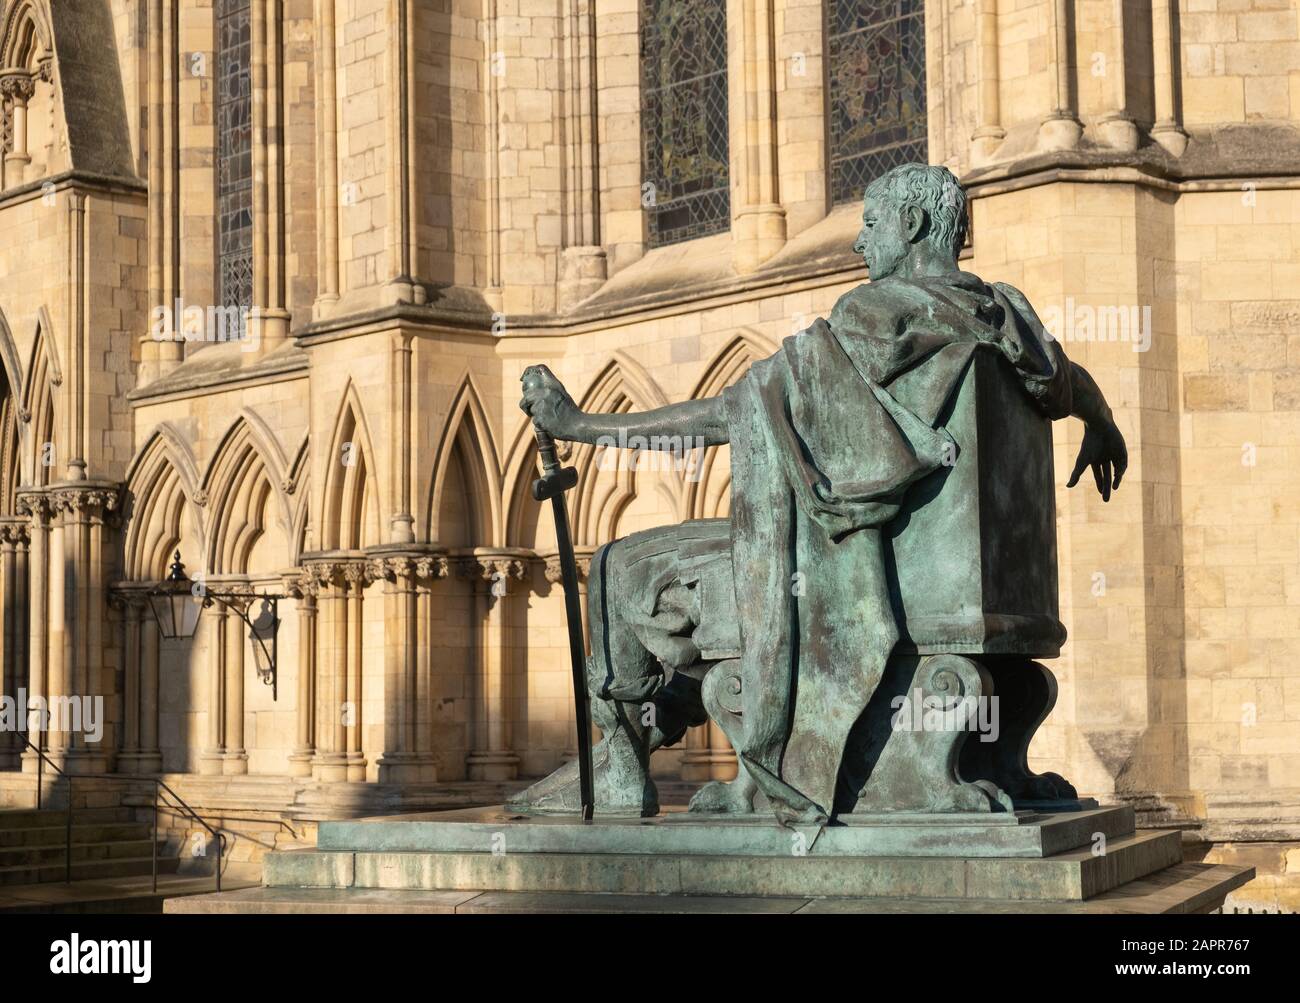 York, Yorkshire, UK: 23rd January 2020. Statue of Constantine the Great outside York Minster, England Stock Photo